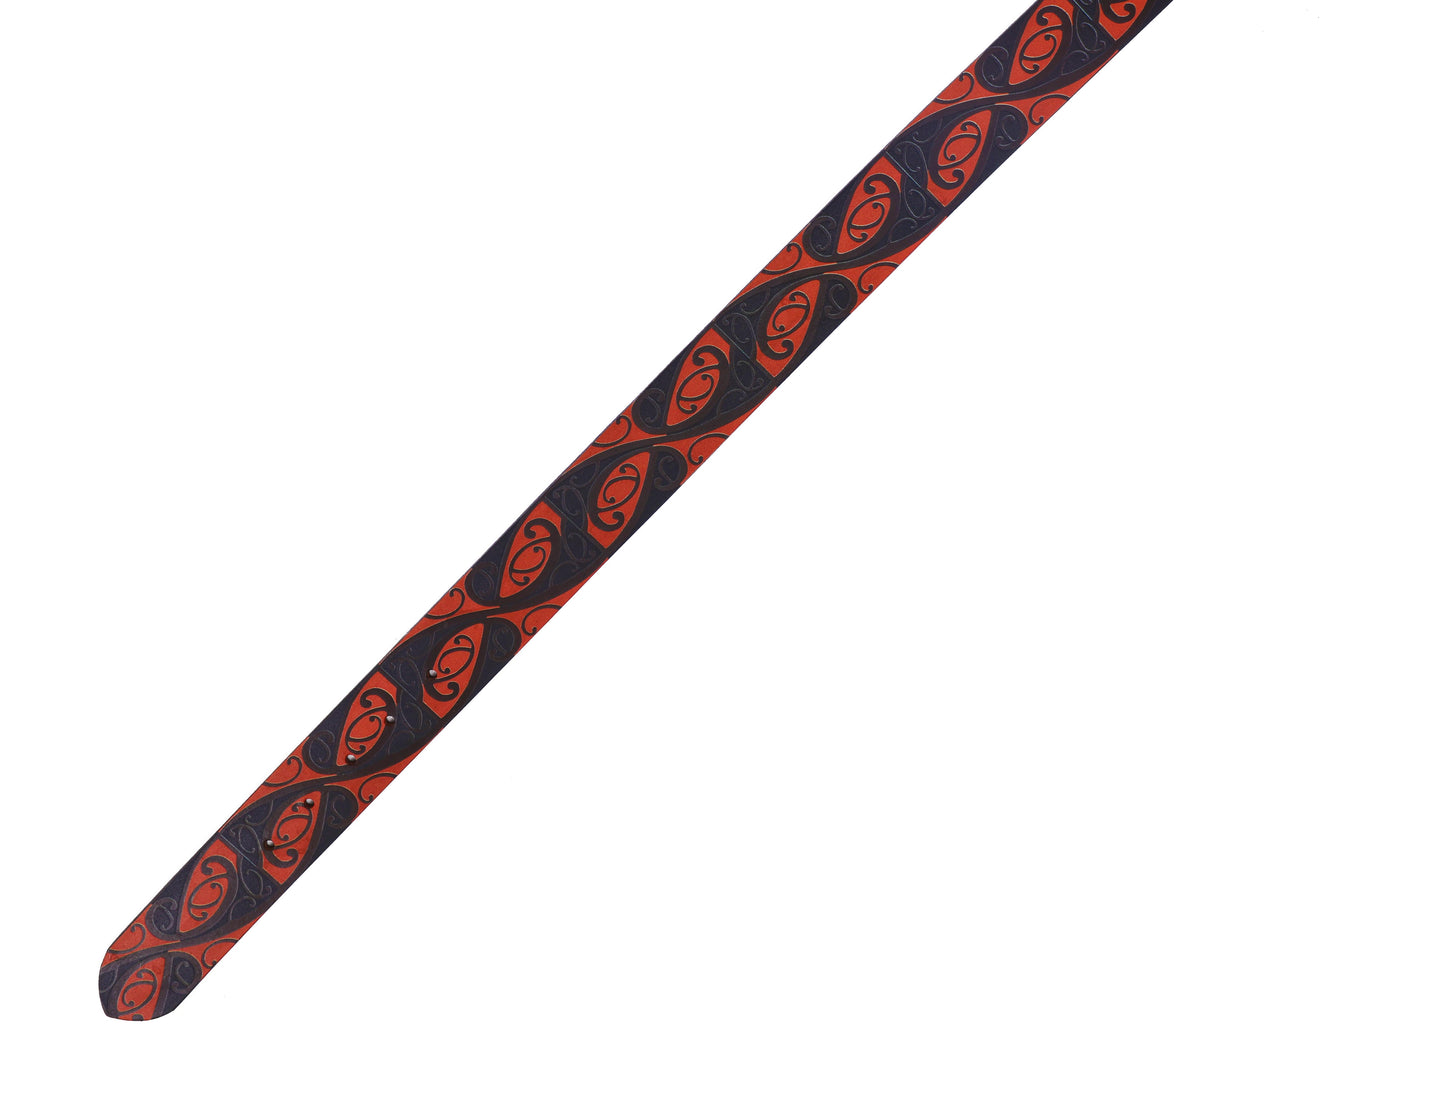 "Bold & Bright: Leather Orange Printing Belts for Statement Style" Art: LB-820